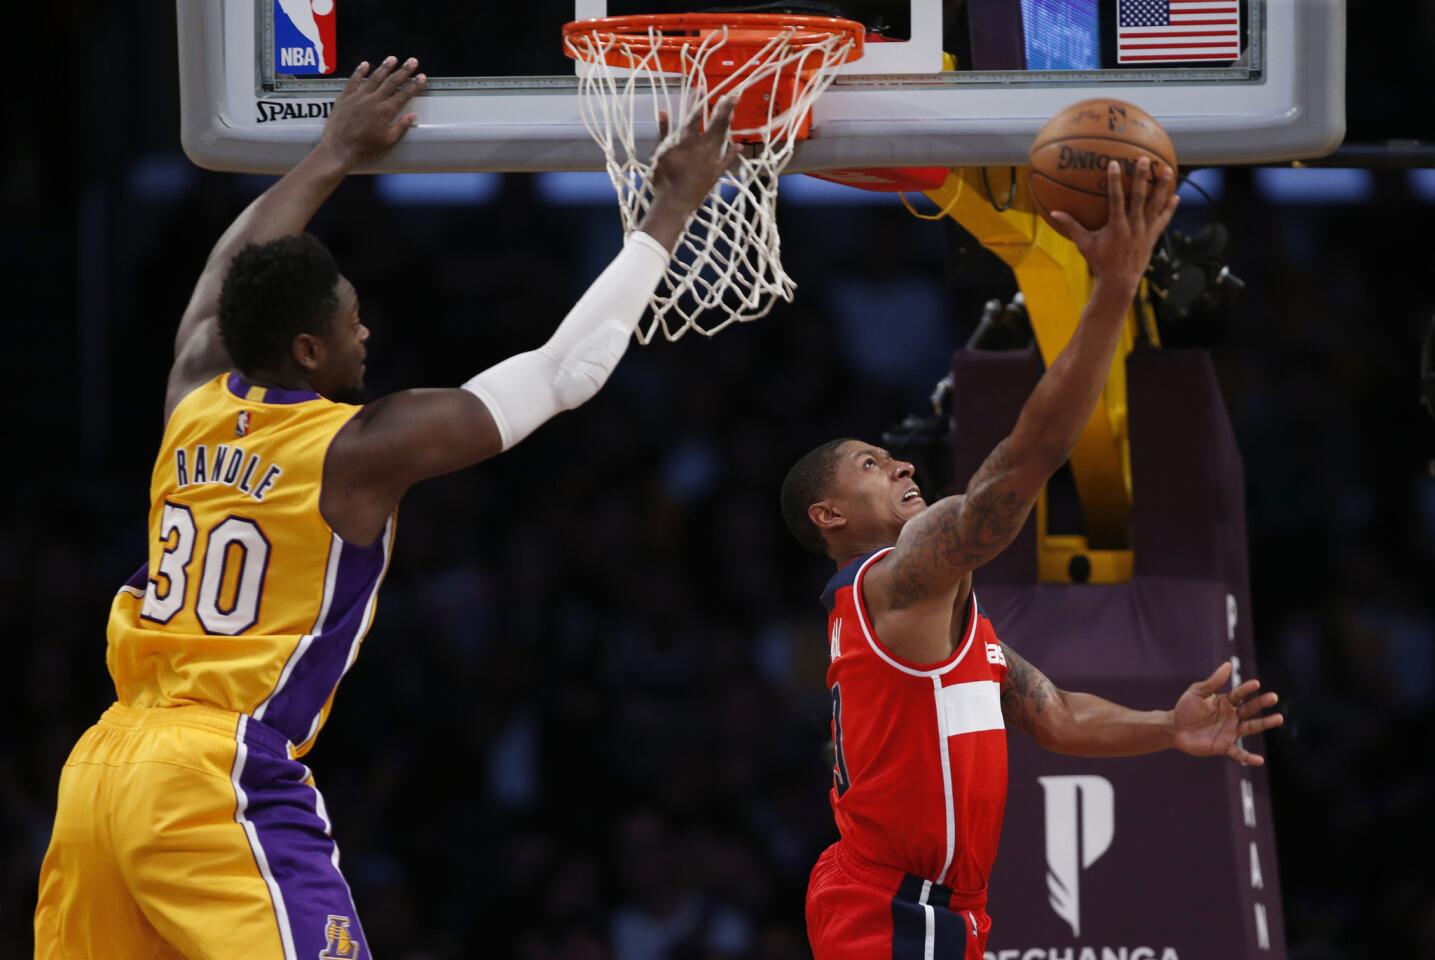 Washington Wizards guard Bradley Beal, right, gets past Lakers forward Julius Randle to score during the second half.